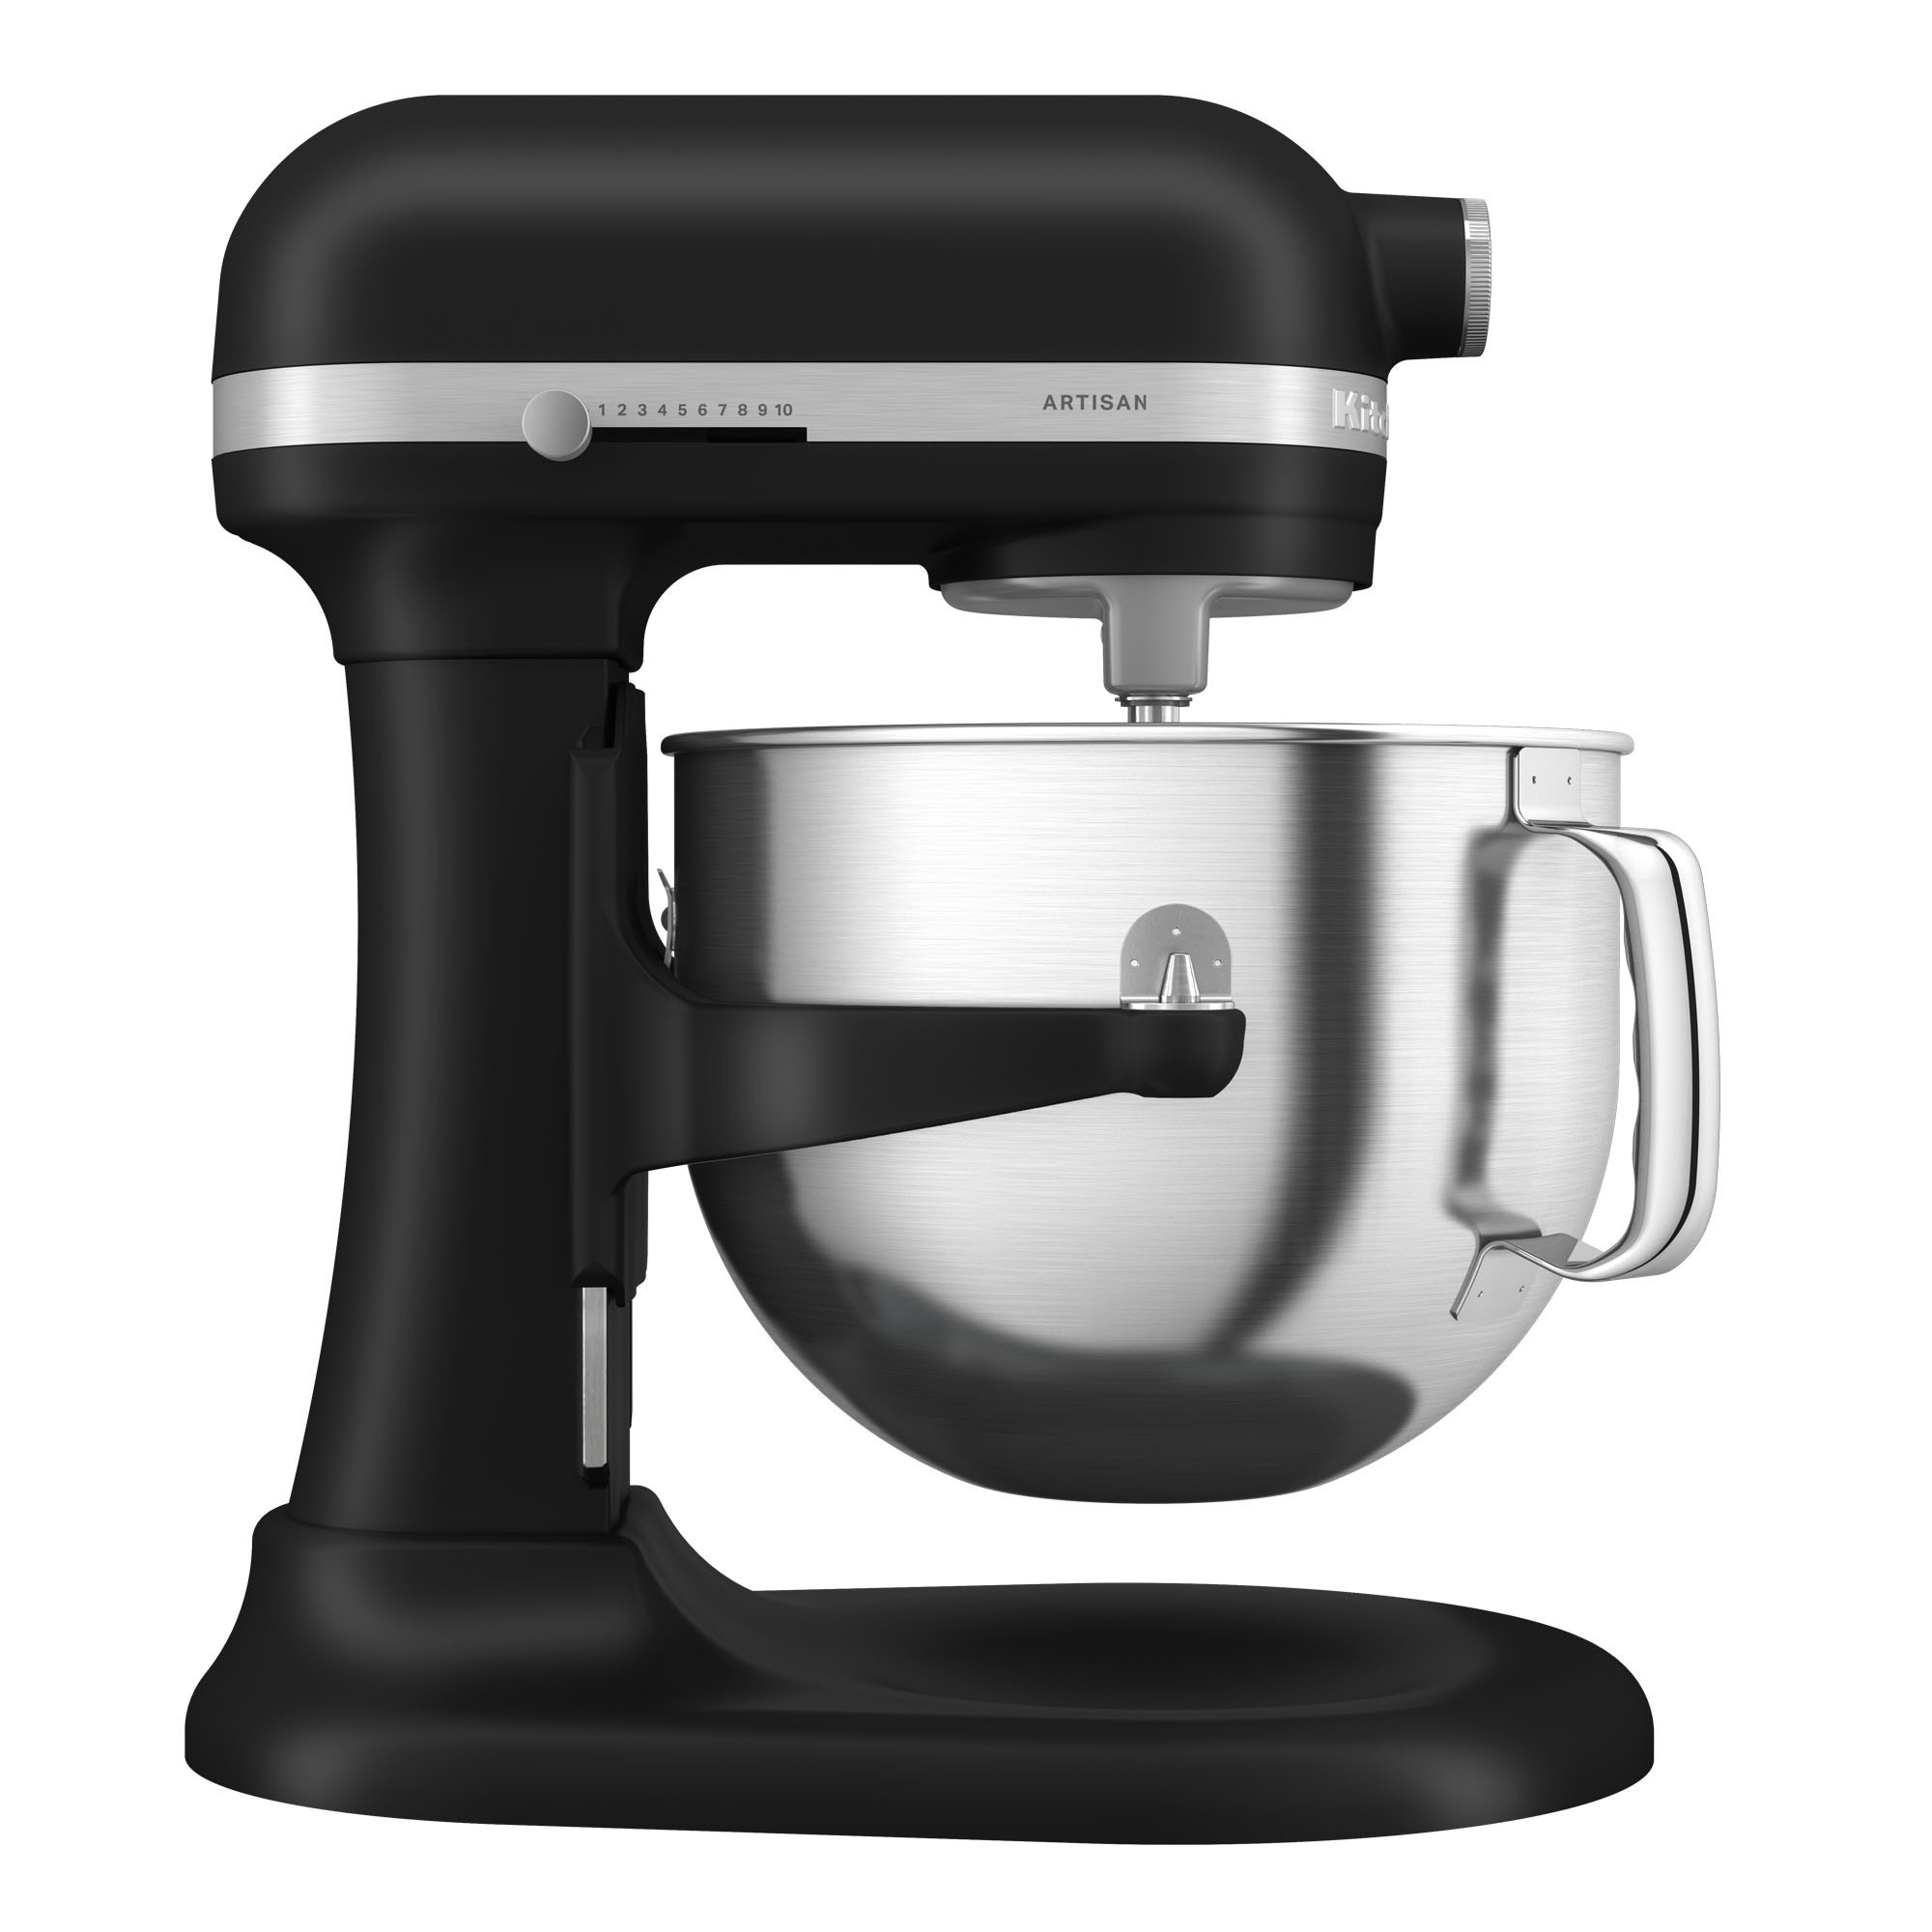 Stand mixer with bowl, 4.3L, with slicer accessory, Classic, Matte White -  KitchenAid